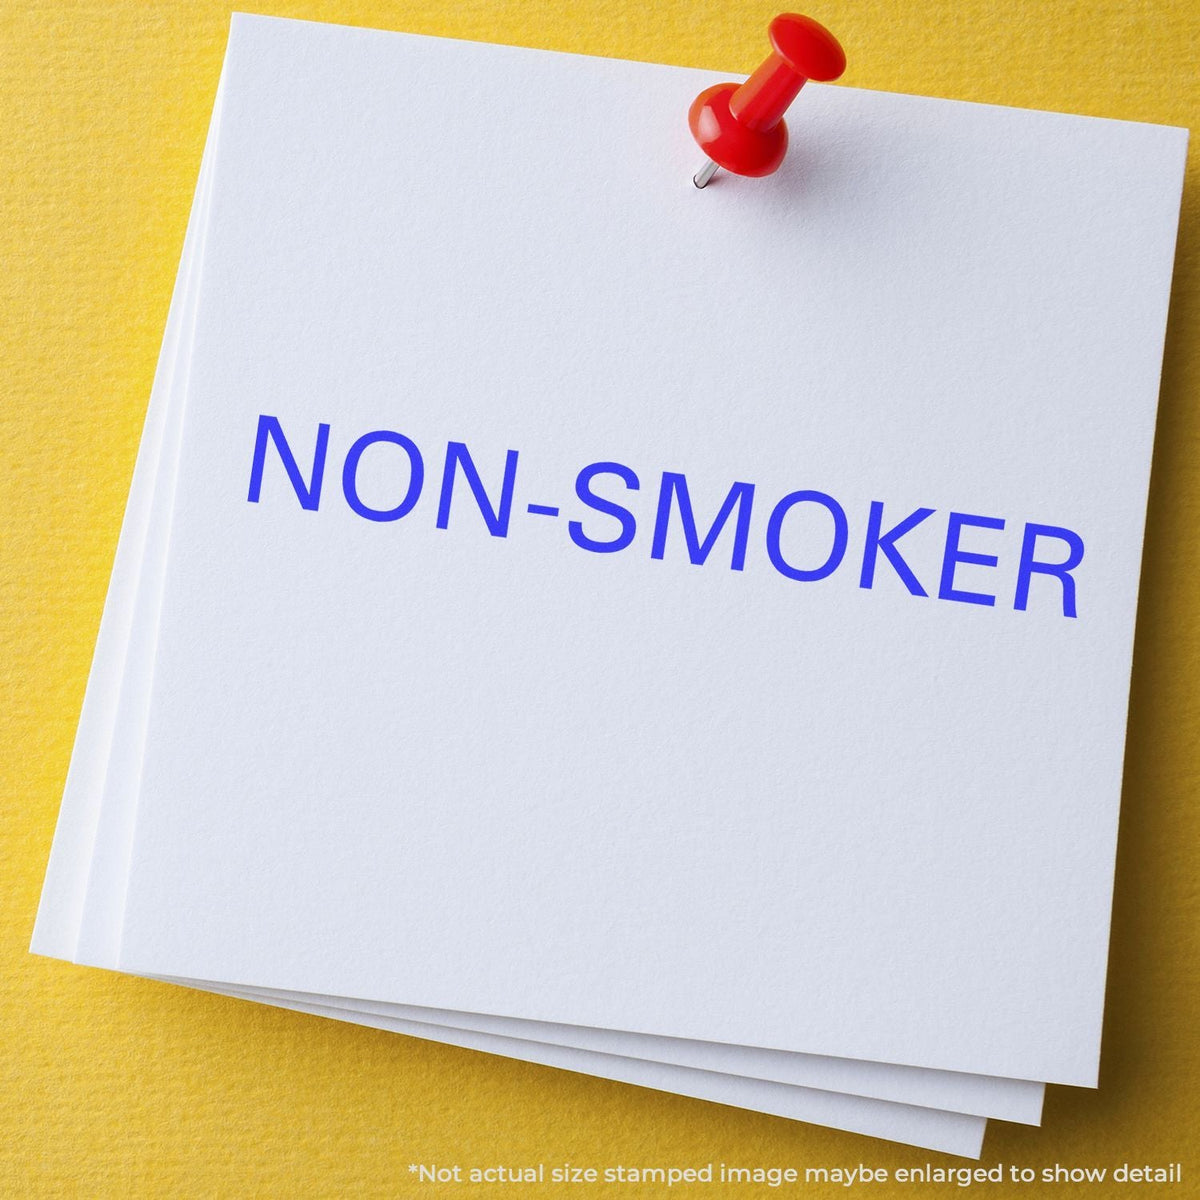 Self-Inking Non-Smoker Stamp In Use Photo